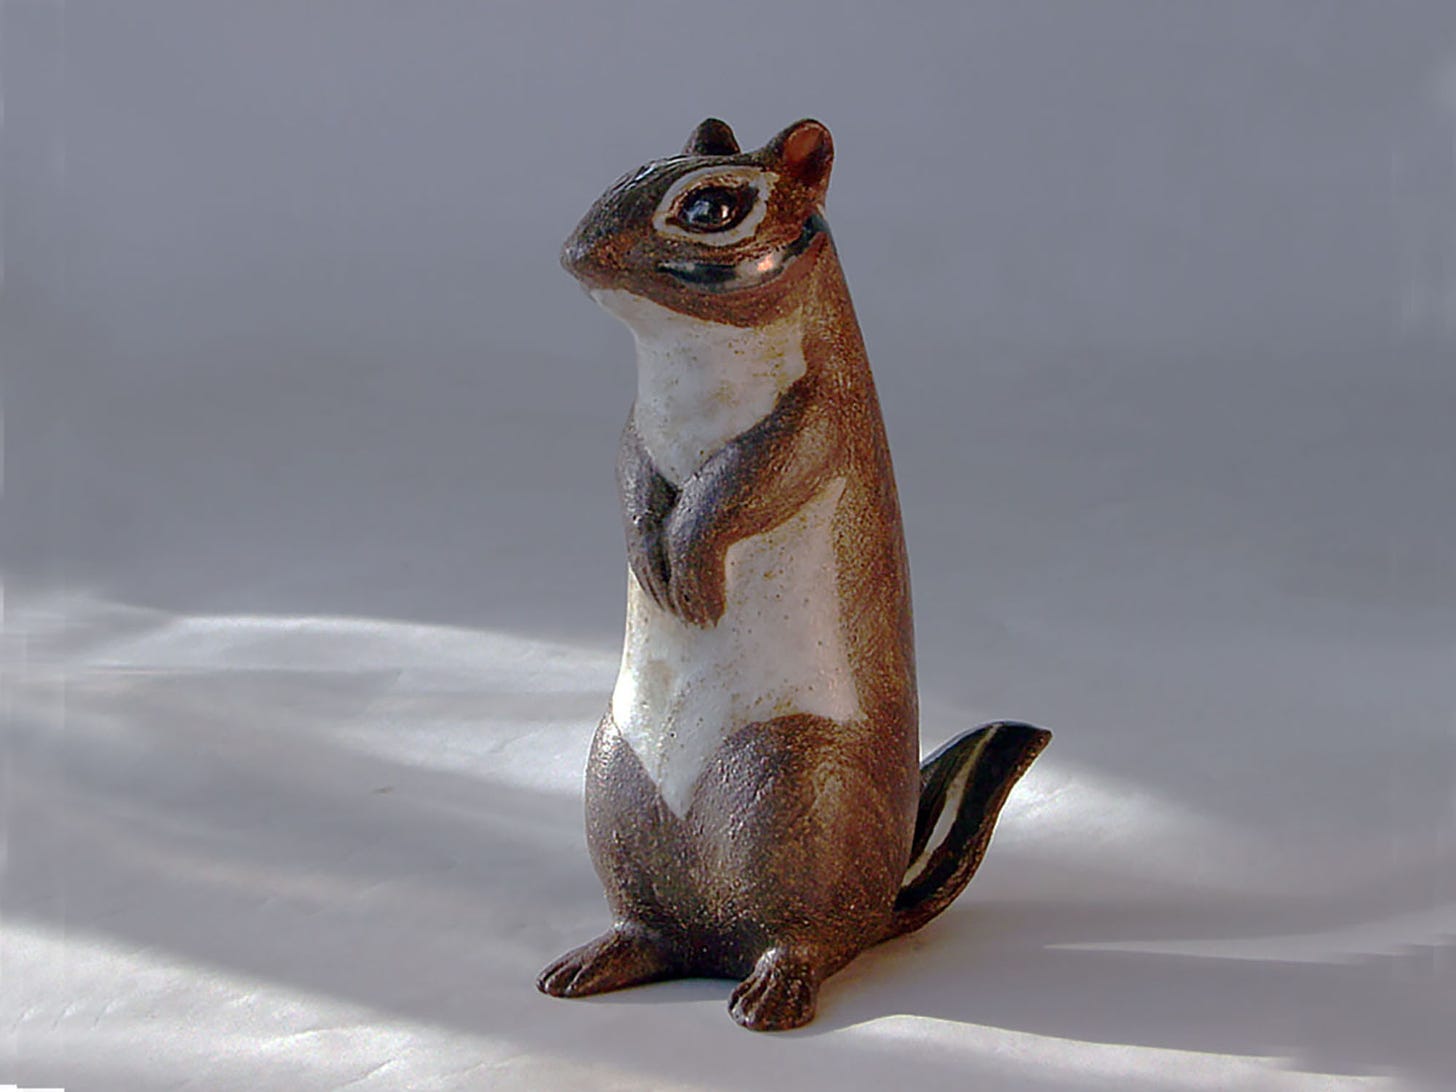 The classic Andersen Design Standing Chipmunk. The back and face is decorated in brown slip with glossy ebony eyes surrounded by a rim of matte white. The belly is also matte white and the tail is glossy ebony with brown and white stripes.